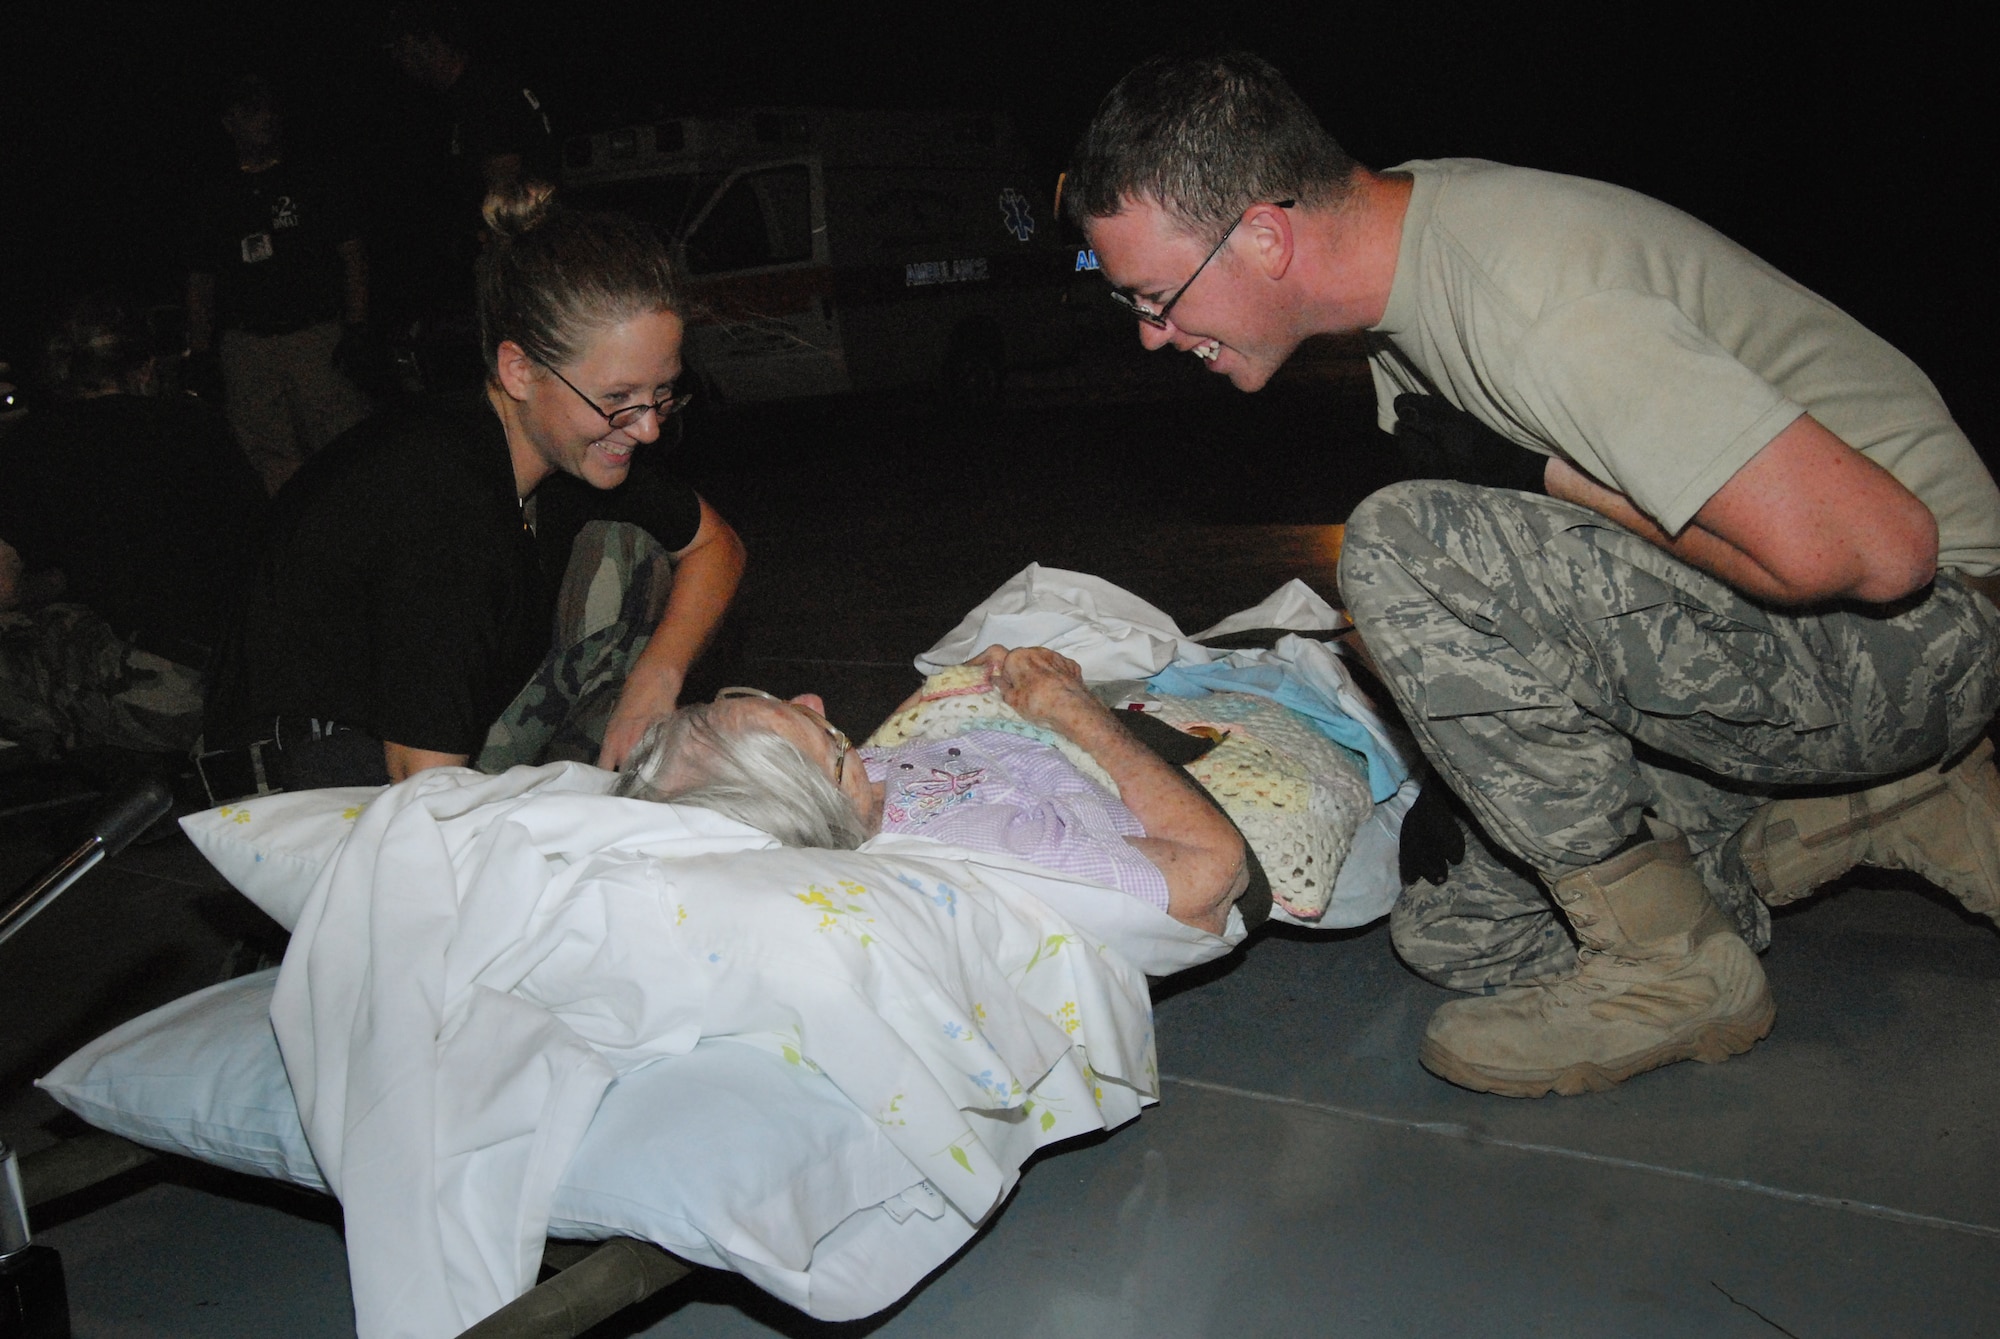 Tech. Sgt. Krystal Marks, 43rd Aerospace Medicine Squadron and Senior Airman Payden Forkum, 43rd Medical Operations Squadron, provide care to an elderly woman at the Lakefront Airport in Louisiana August 31. (U.S. Air Force photo/Airman 1st Class Mindy Bloem)